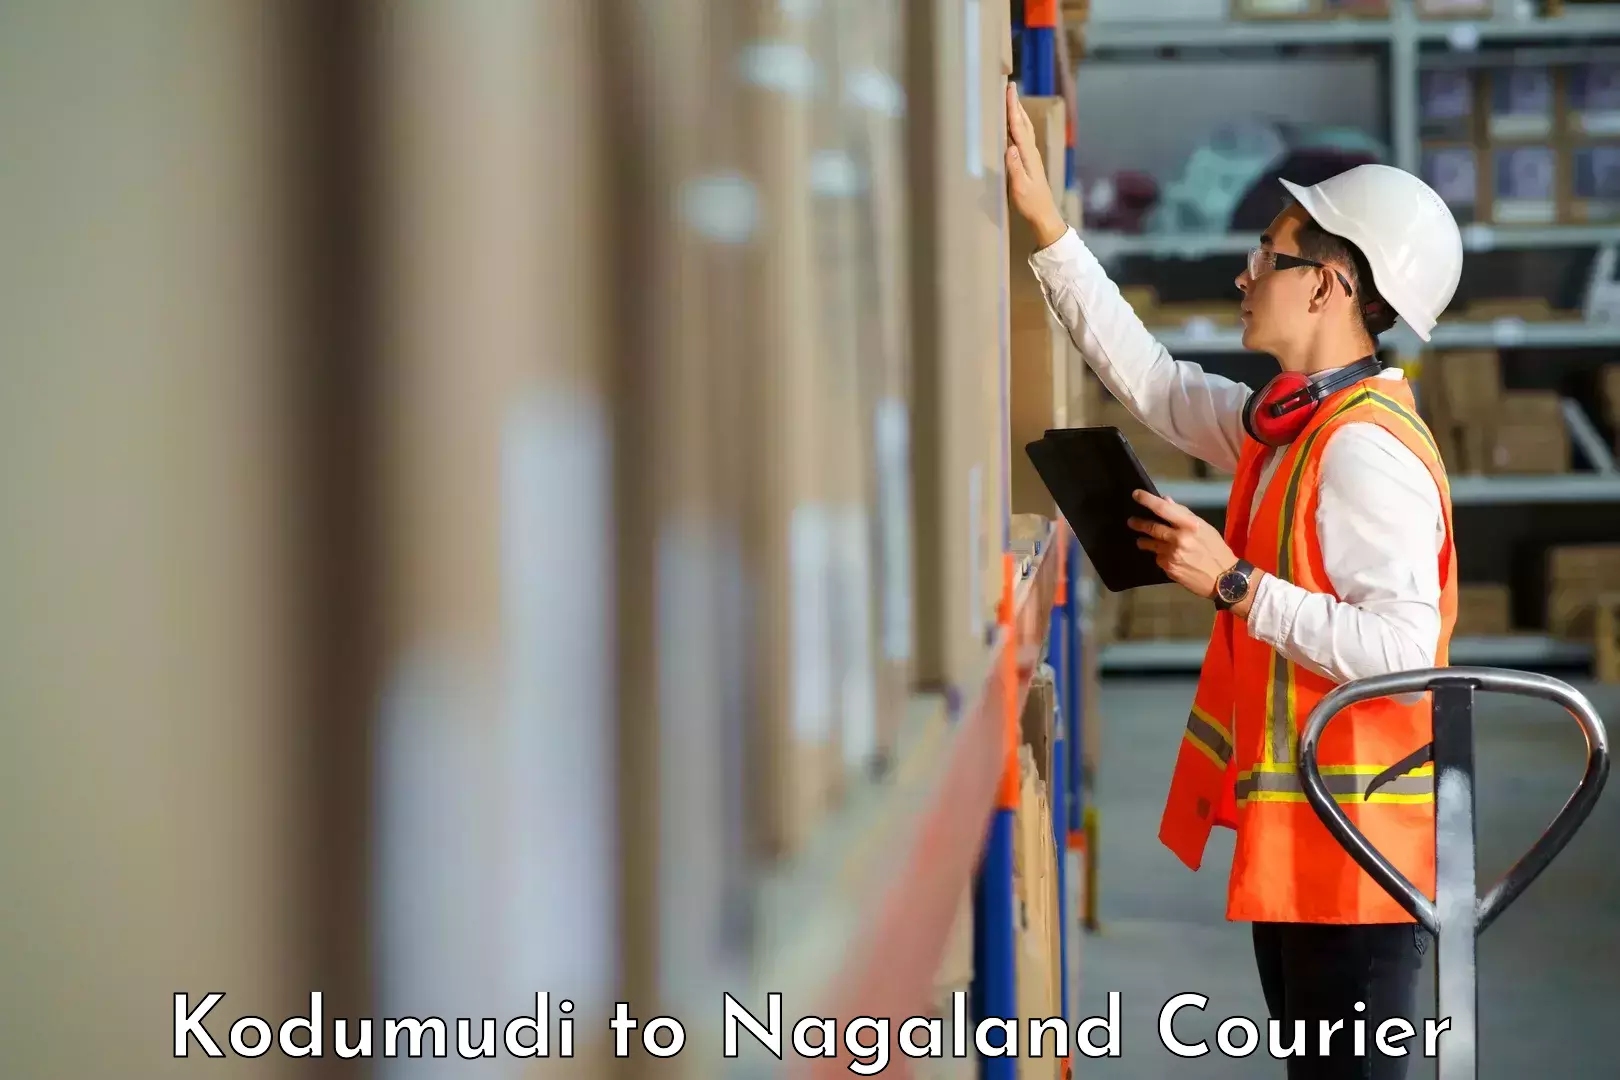 State-of-the-art courier technology Kodumudi to Nagaland